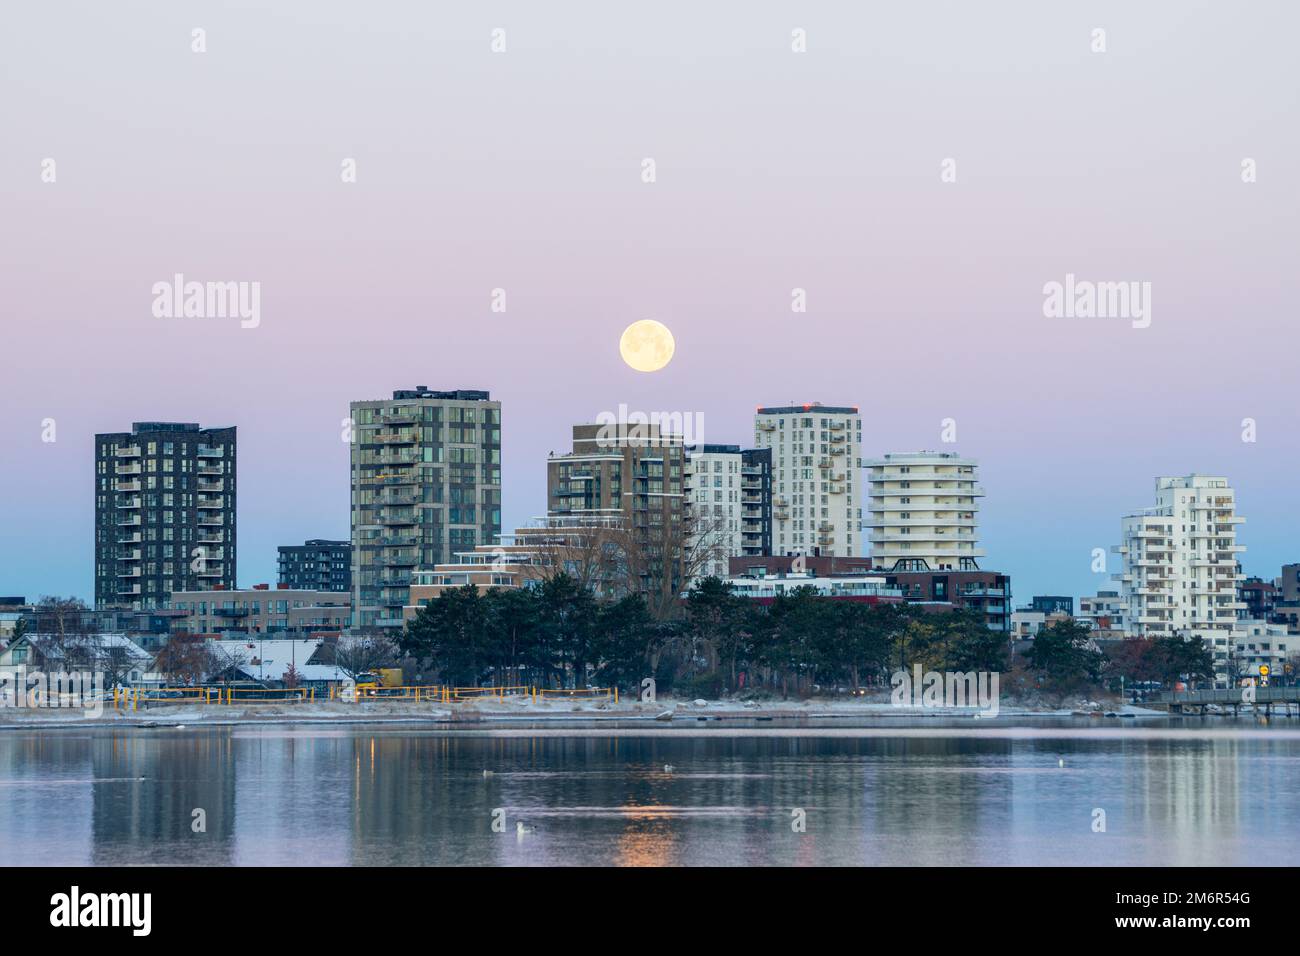 Amager Strandvej, Copenhagen, Denmark. Tower blocks near the Amager Strandpark eastern side of the city, with the full moon and visible belt of venus Stock Photo